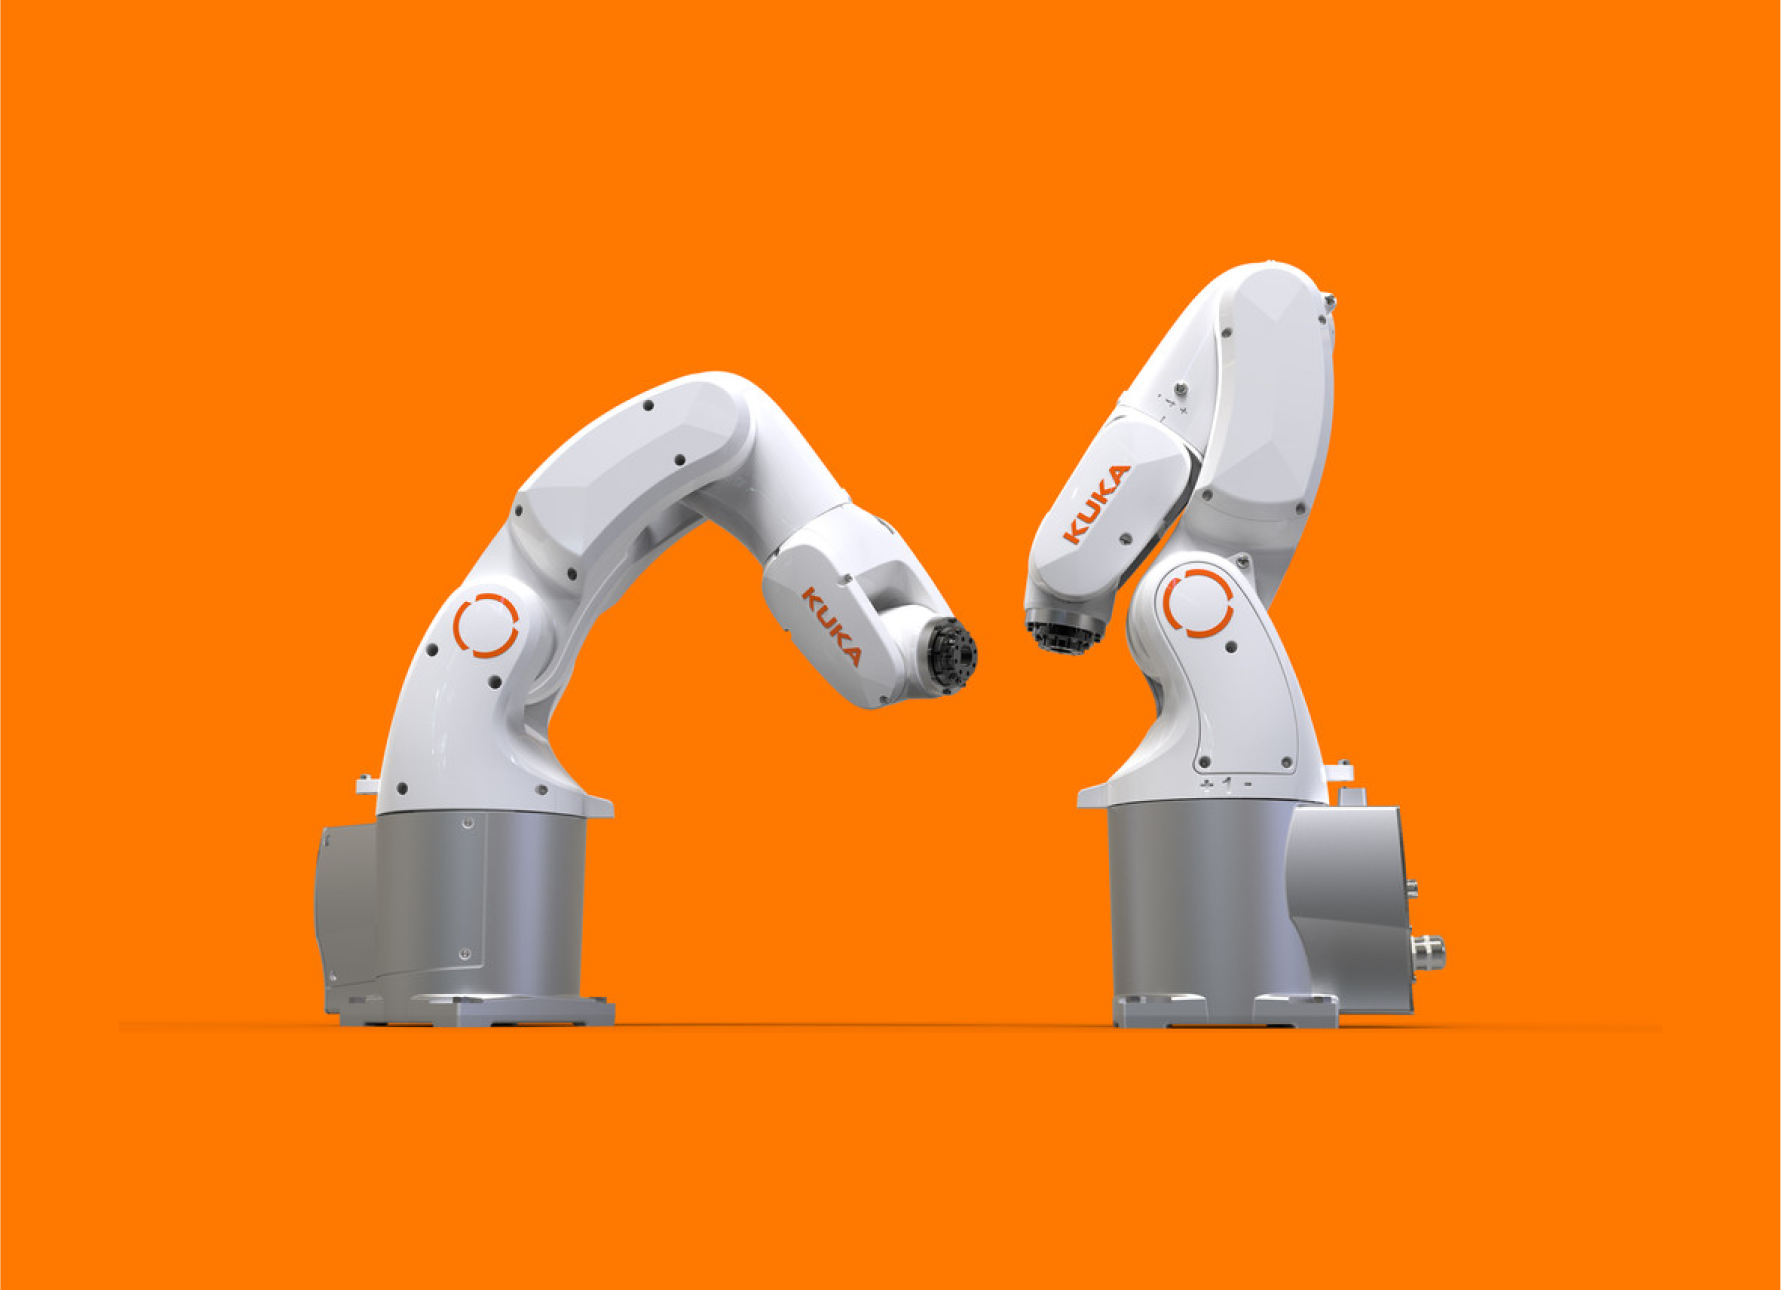 two Kuka industrial robots on an orange background